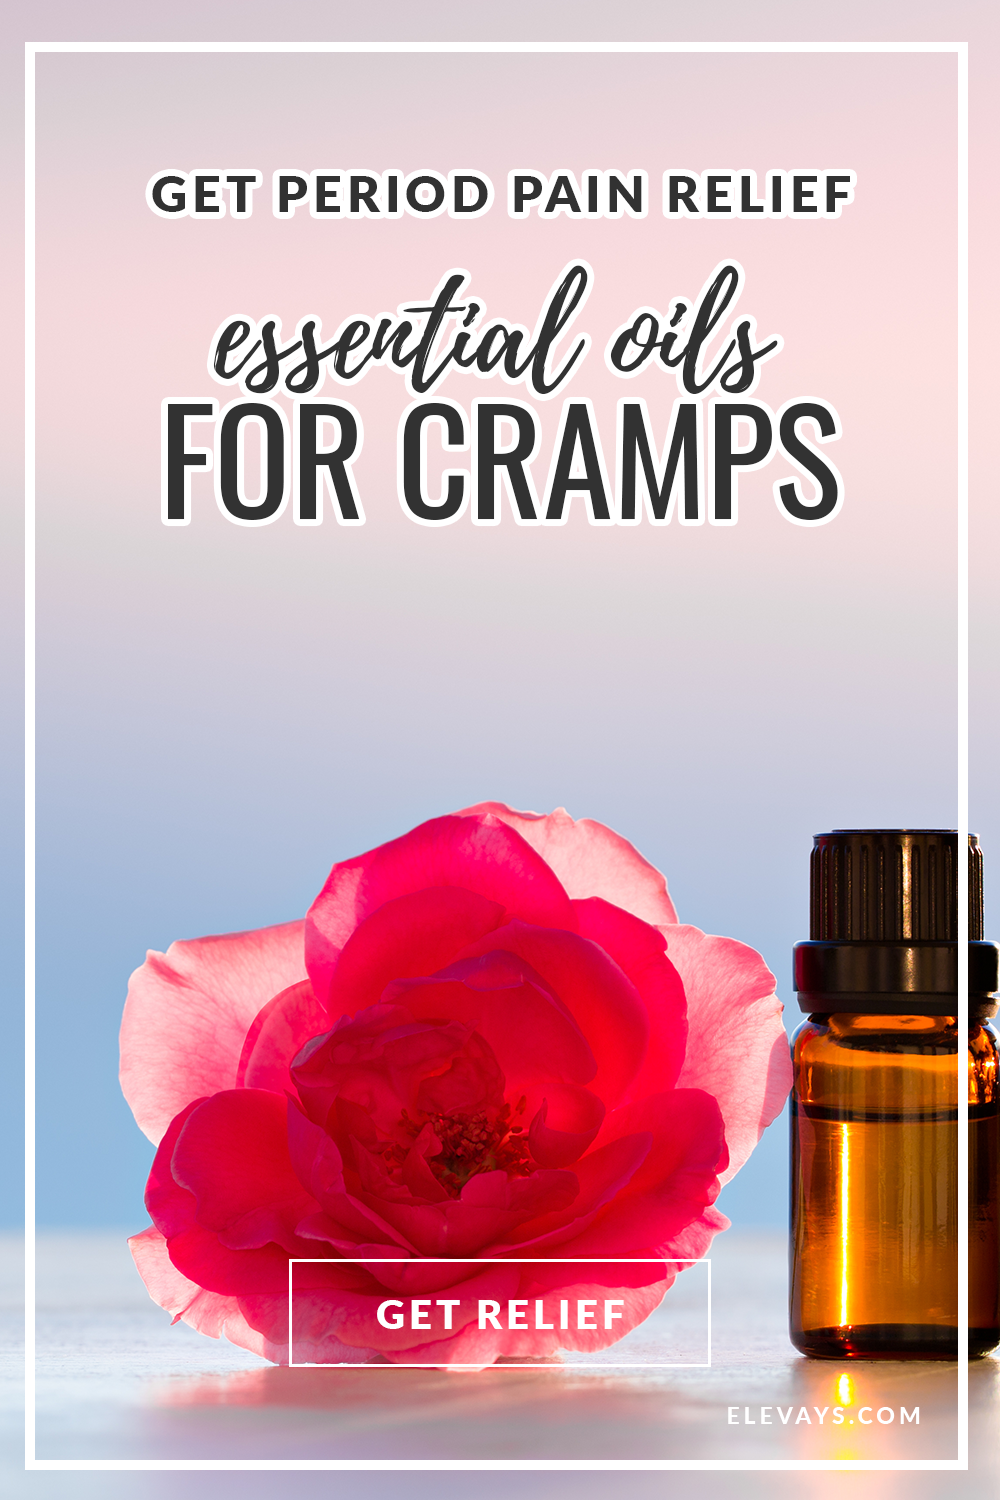 Get Period Pain Relief with Essential Oils for Menstrual Cramps